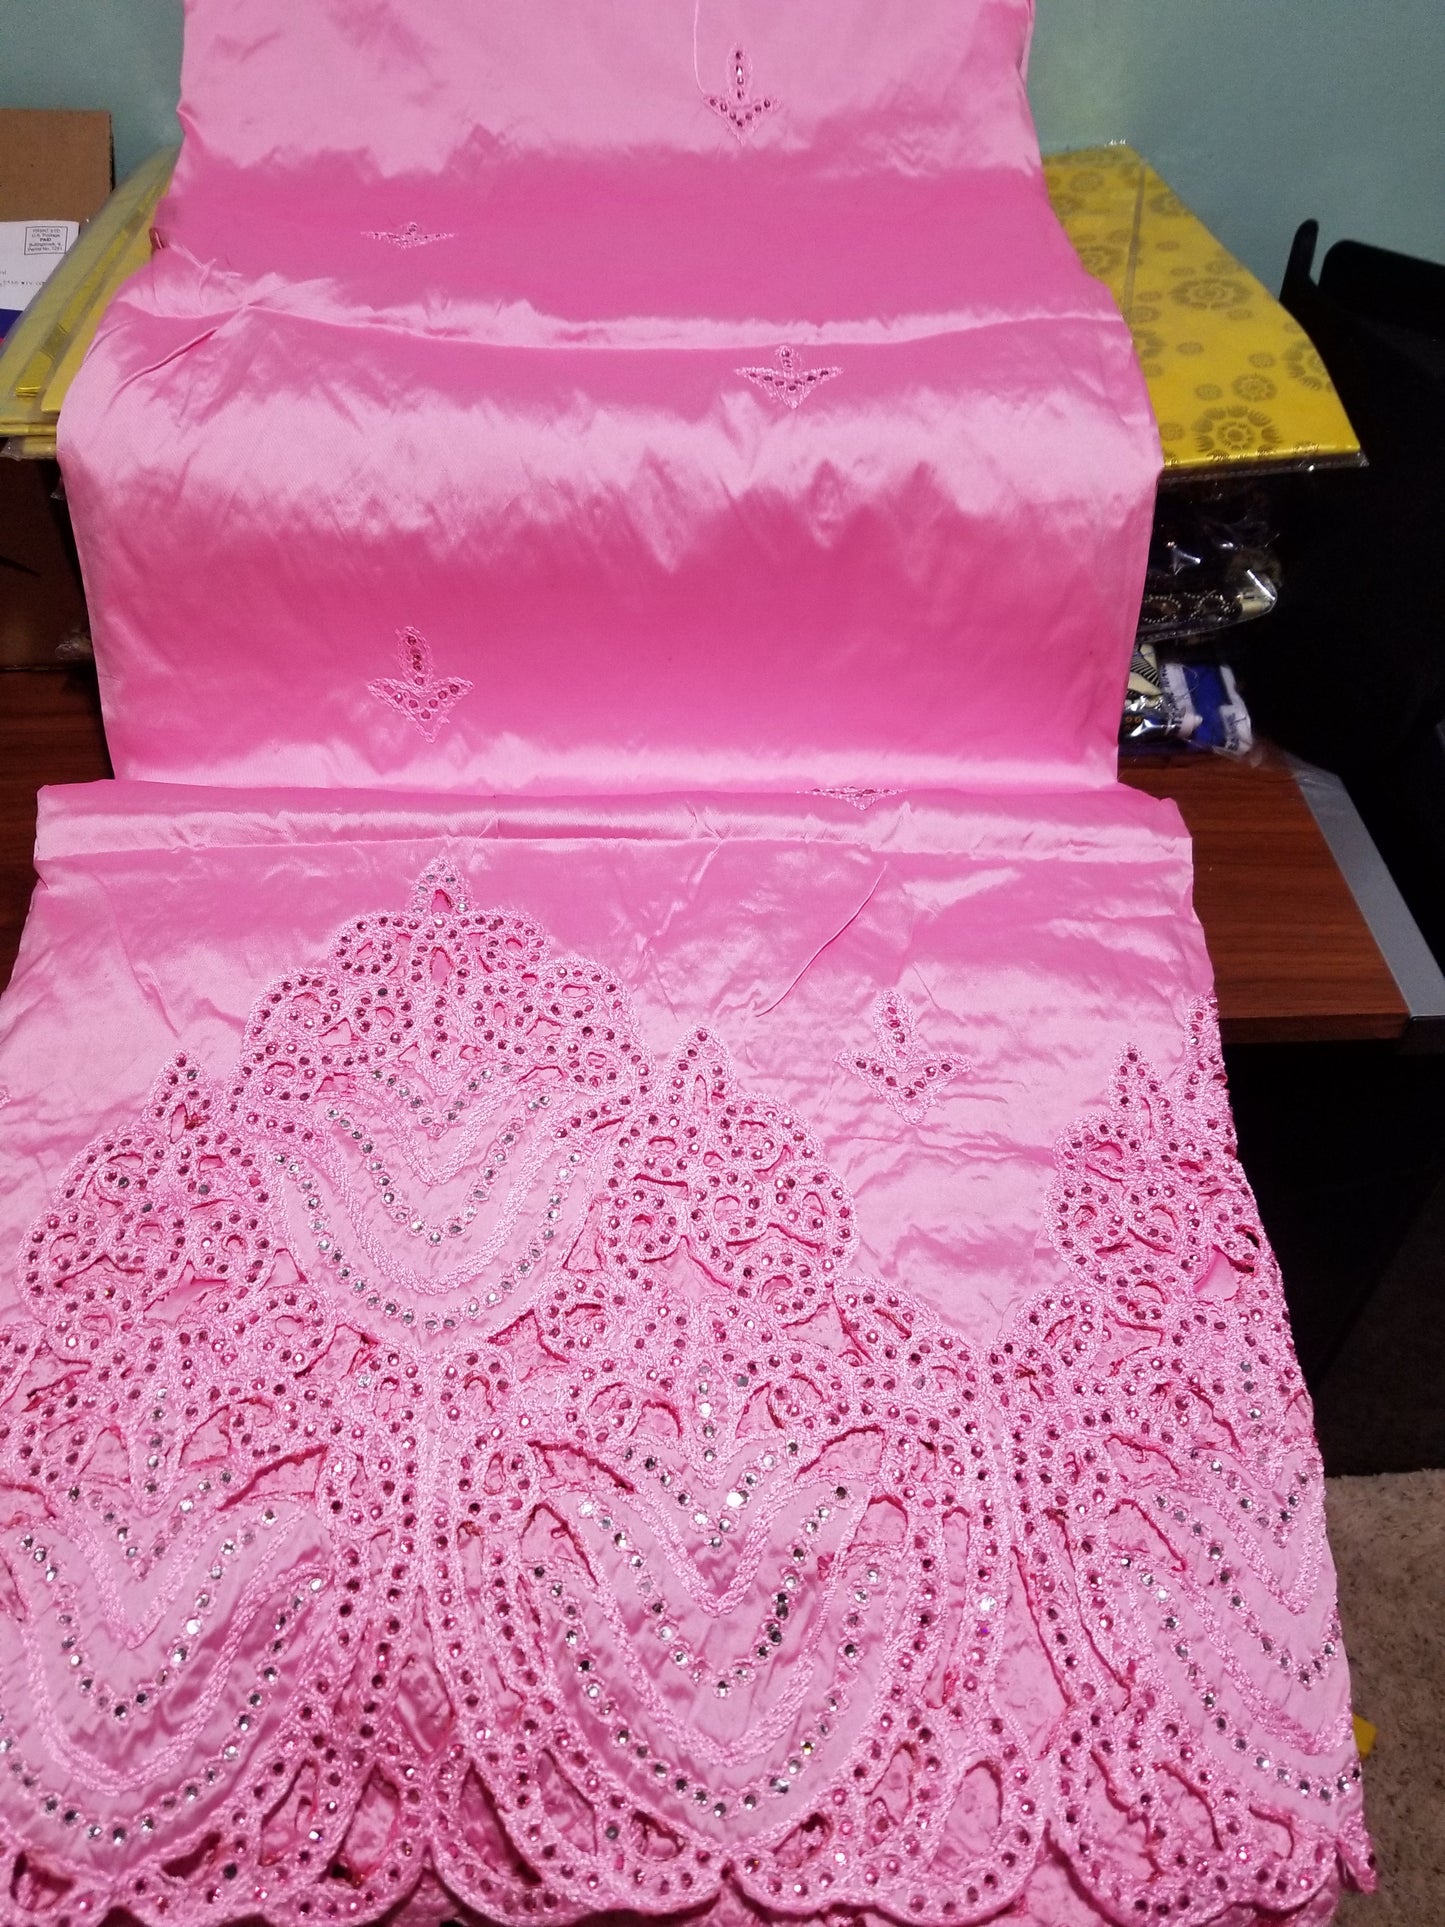 Special sale: high quality embroidered Taffeta Silk George wrapper with matching 1.8yds blouse. Use for  African wedding/party dress. Sold with blouse fabric. Small-George